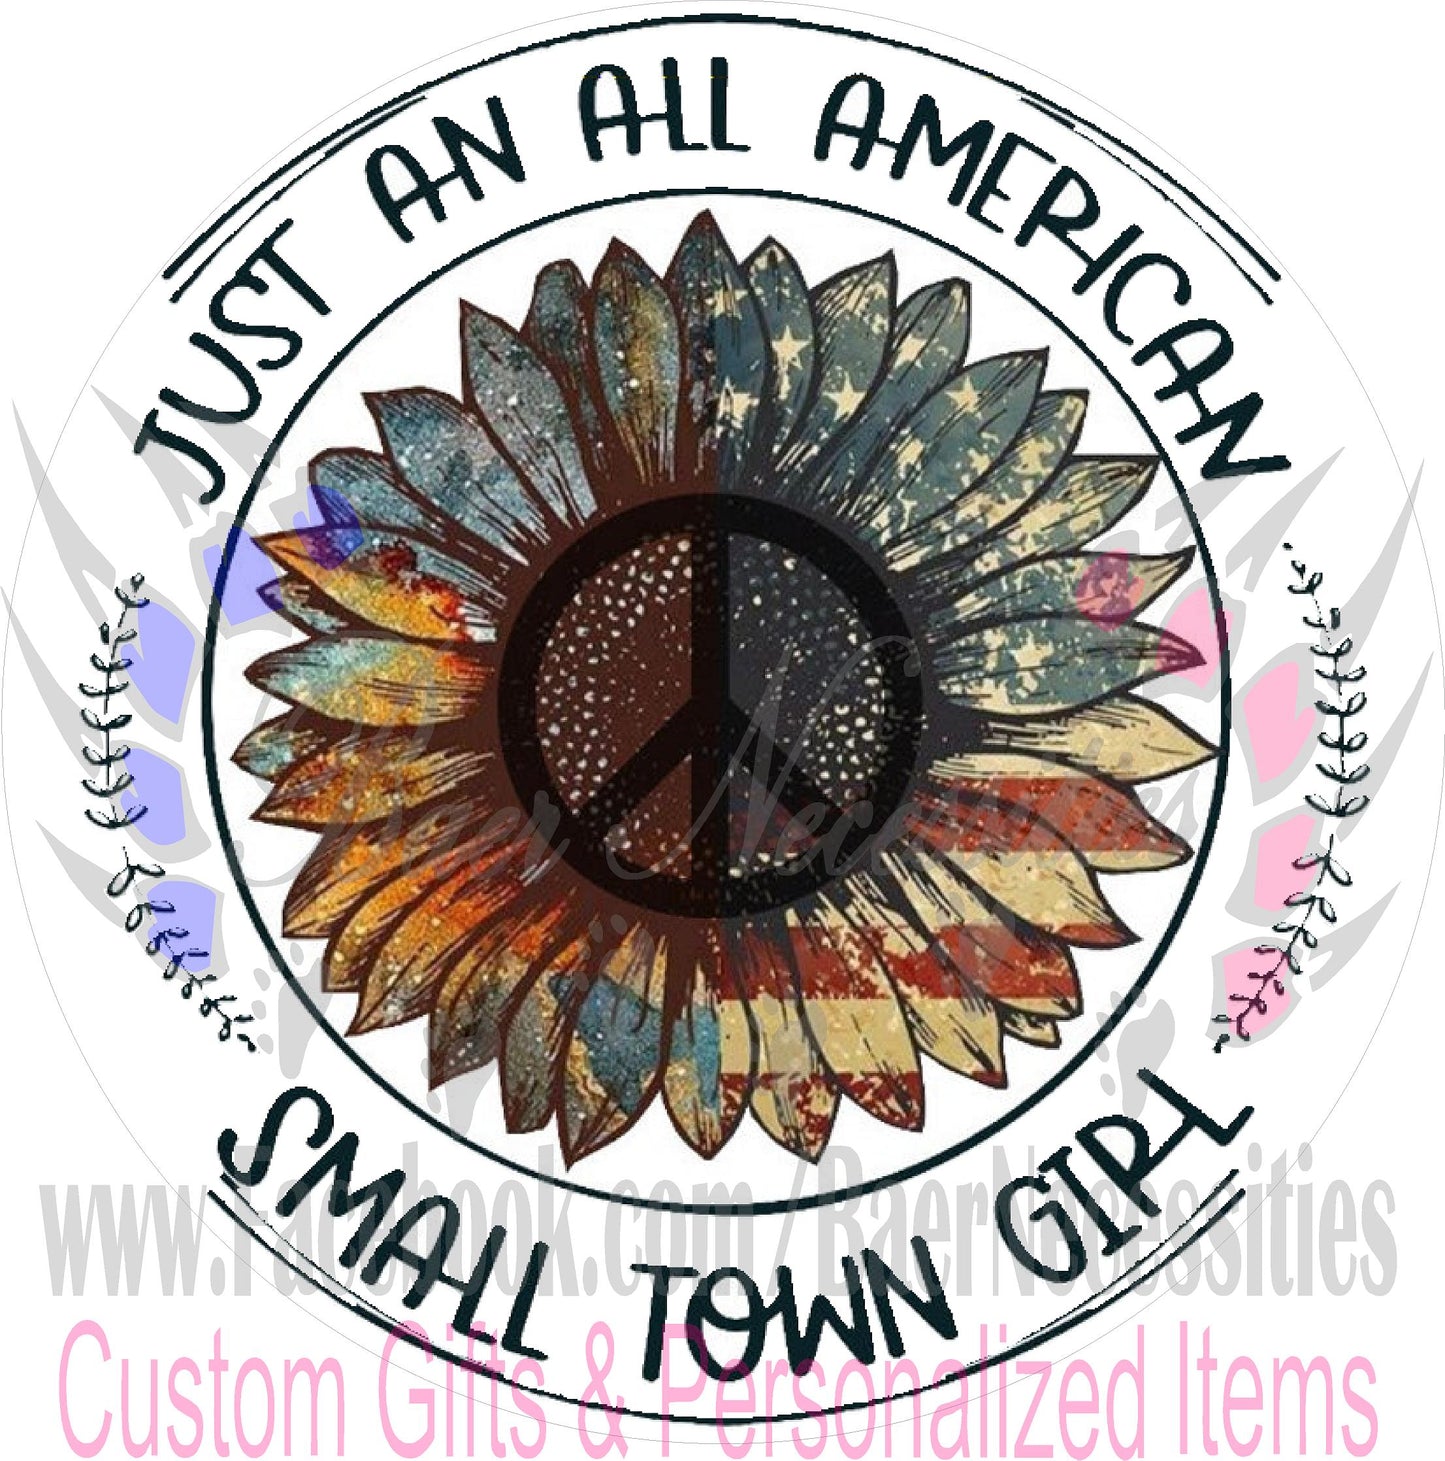 Just an all American small town girl - Tumbler Decal